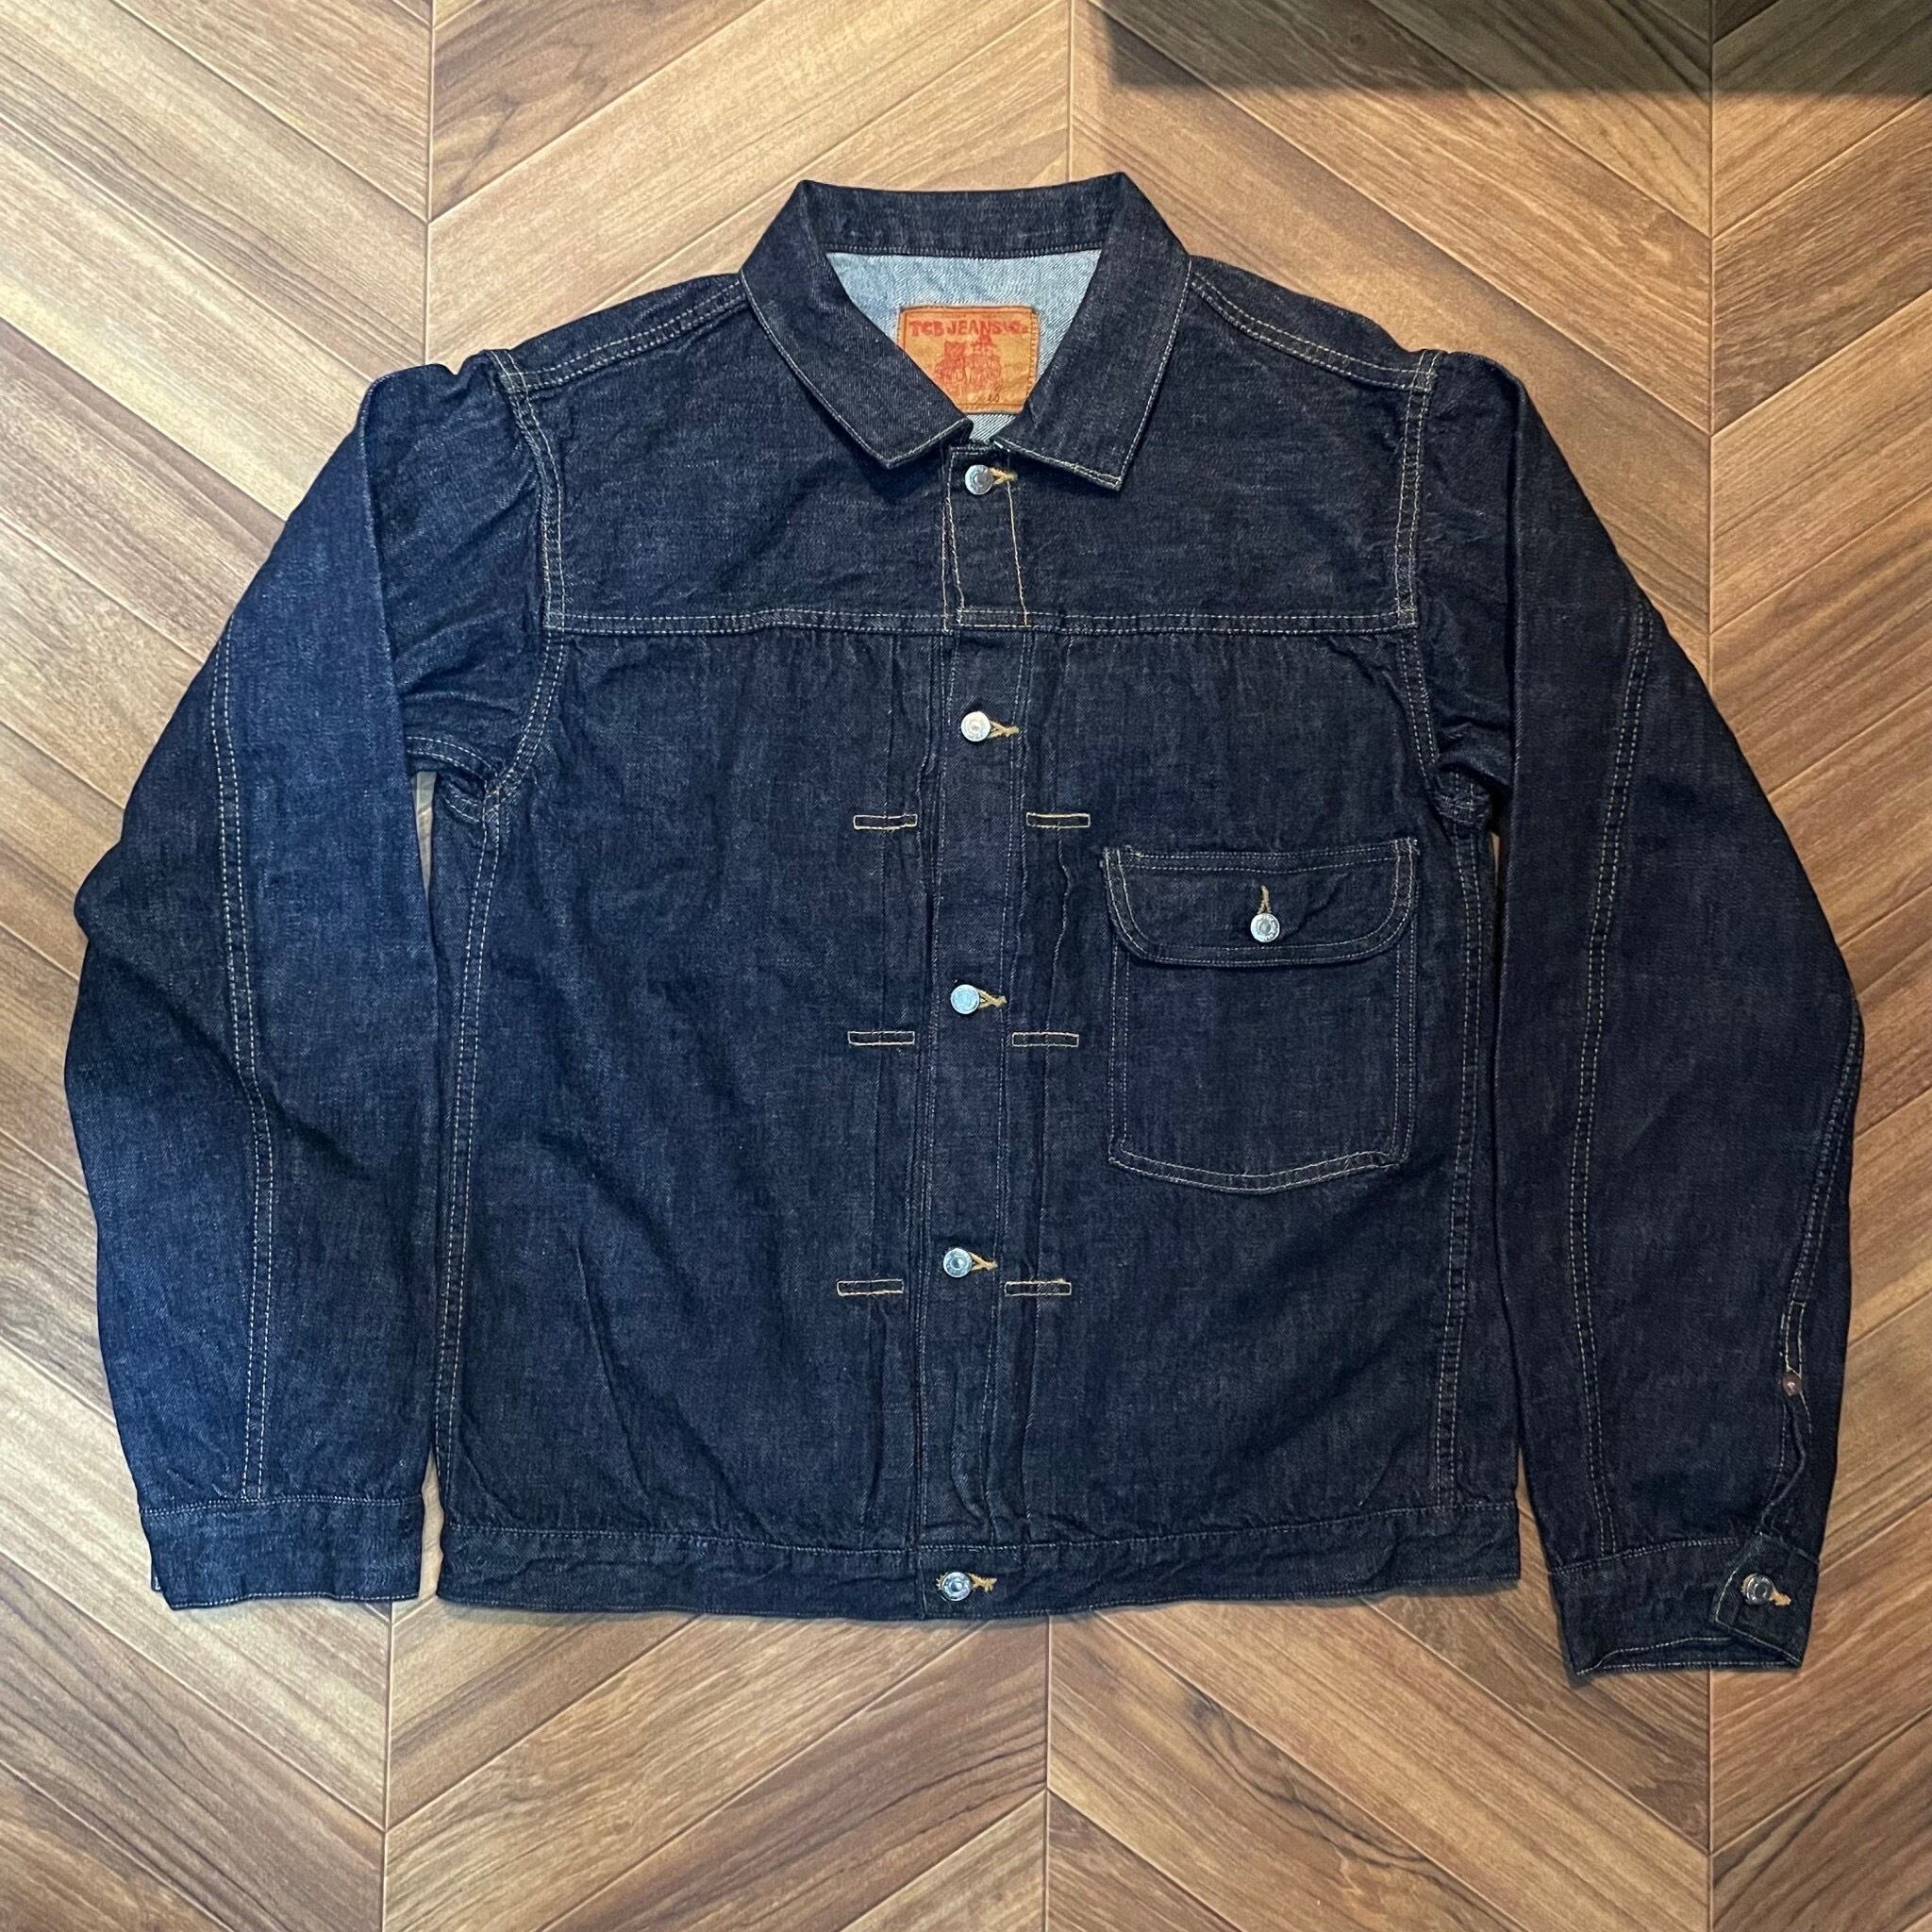 TCB jeans 20's Jacket | STYLE FACTORY & CO.